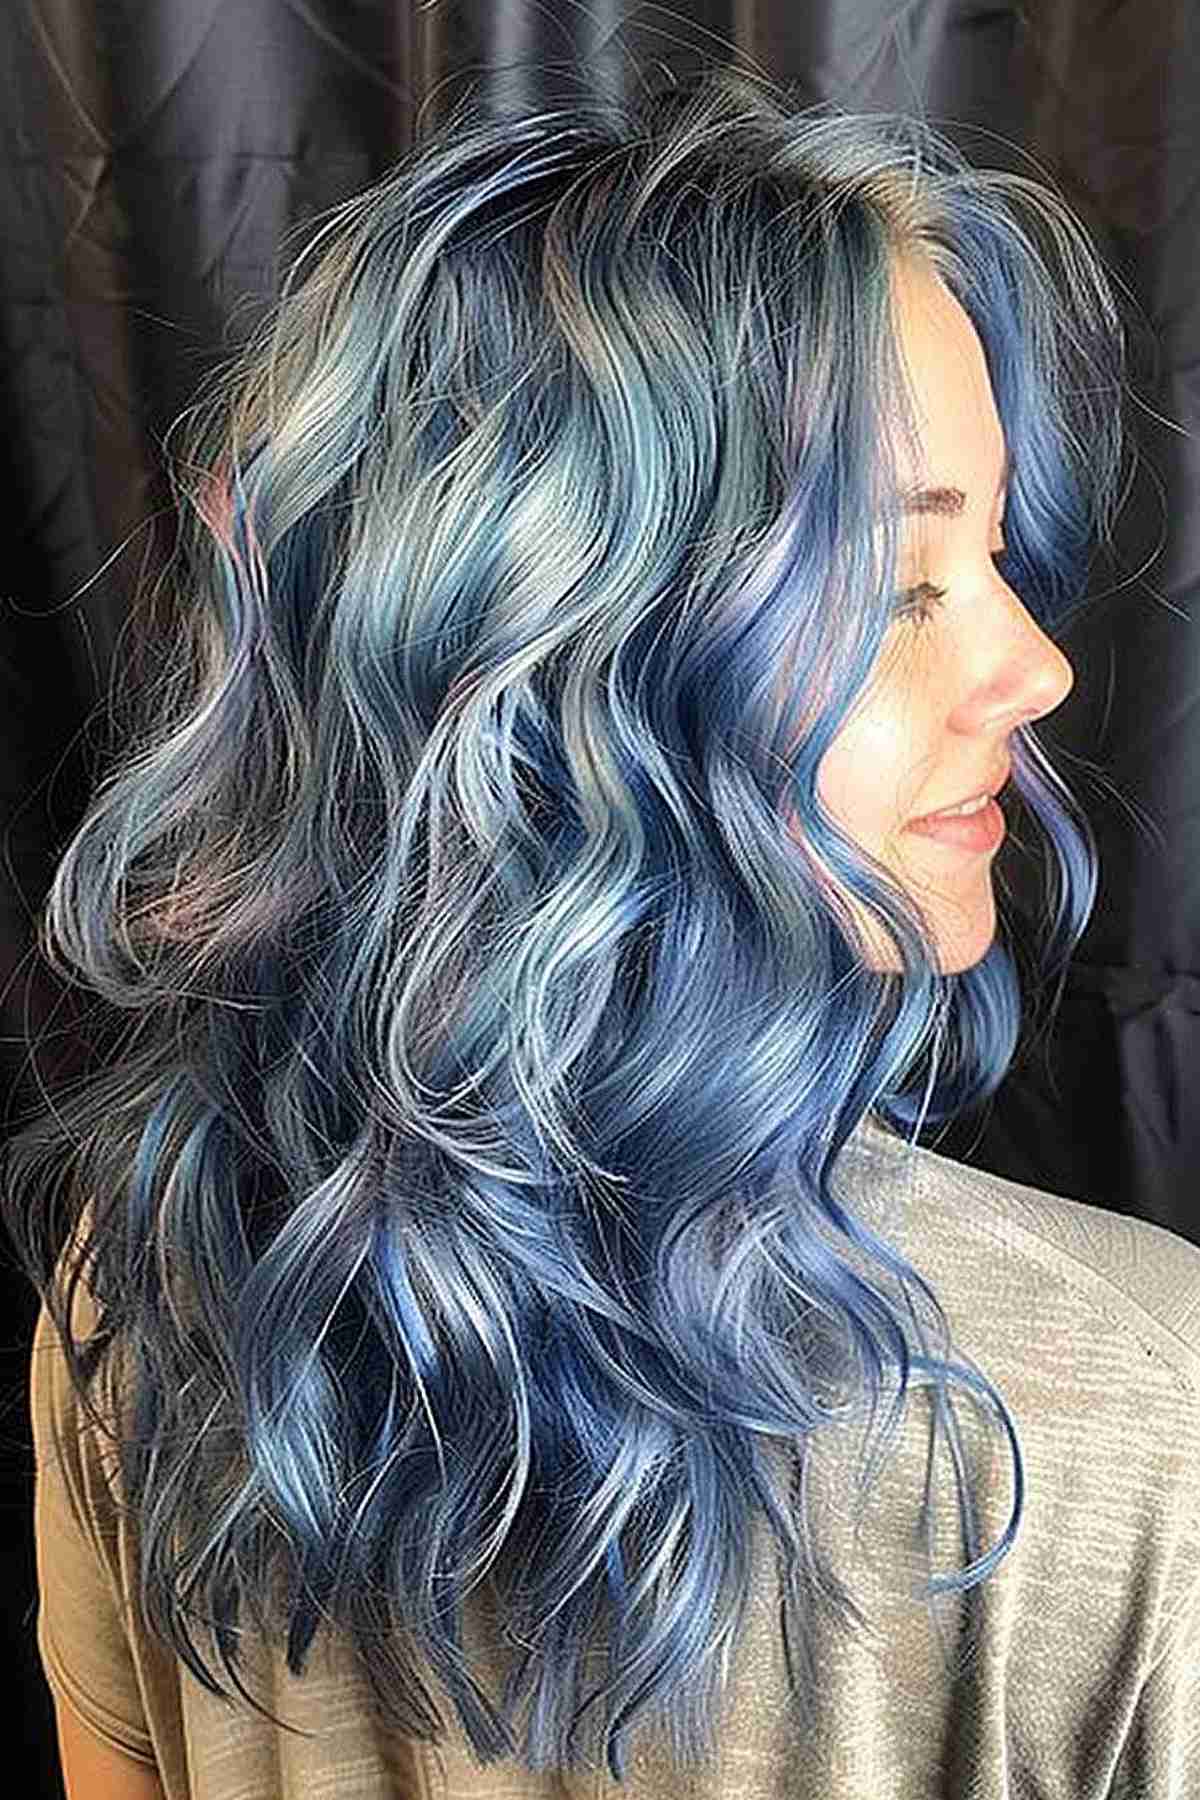 Wavy medium-length hair with gradient of blue shades from deep ocean to sky blue